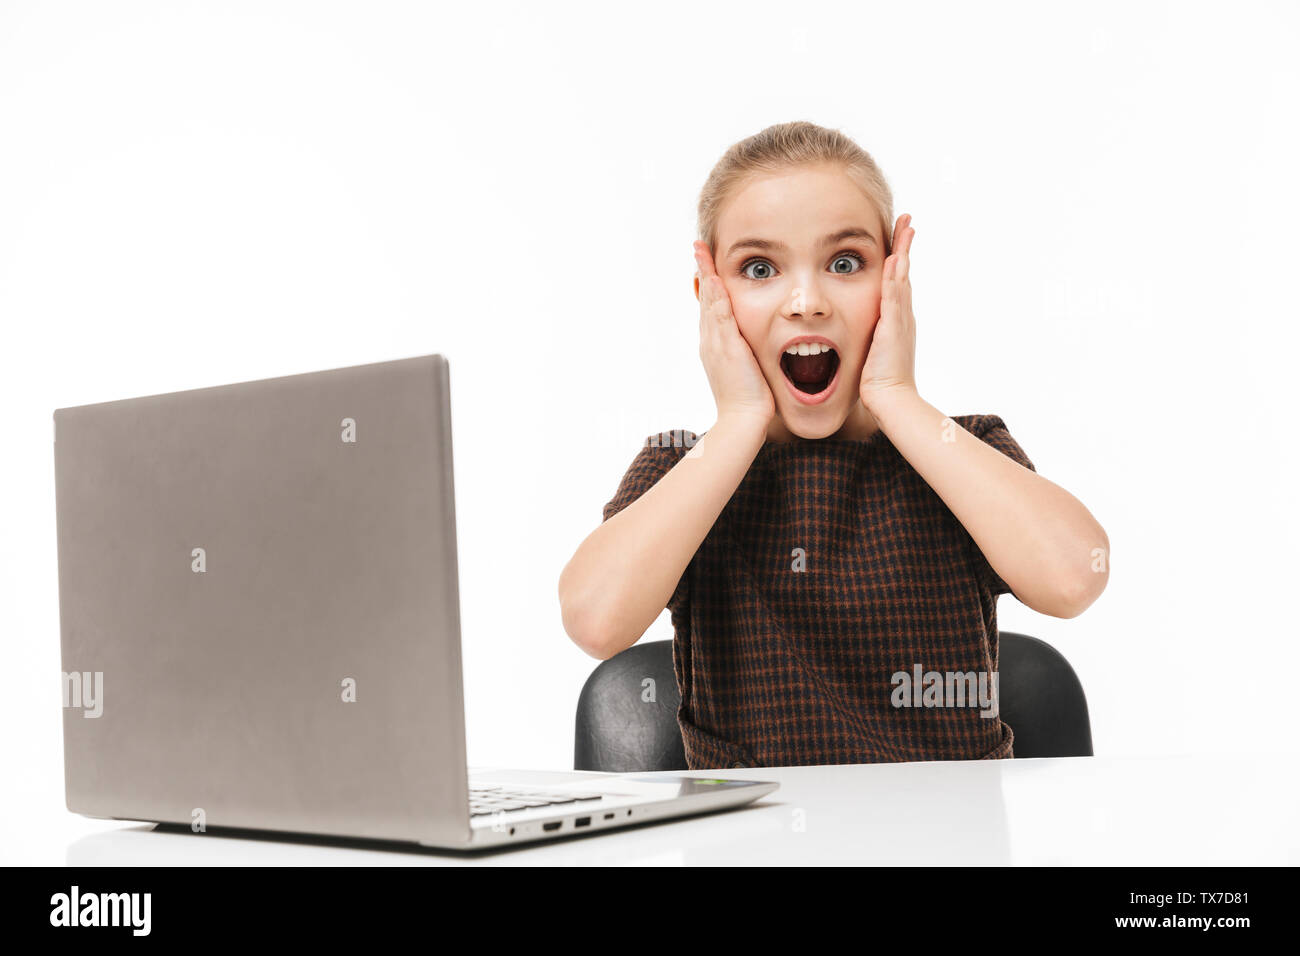 Portrait of shocked school girl rejoicing and using silver laptop while sitting at desk in class isolated over white background Stock Photo